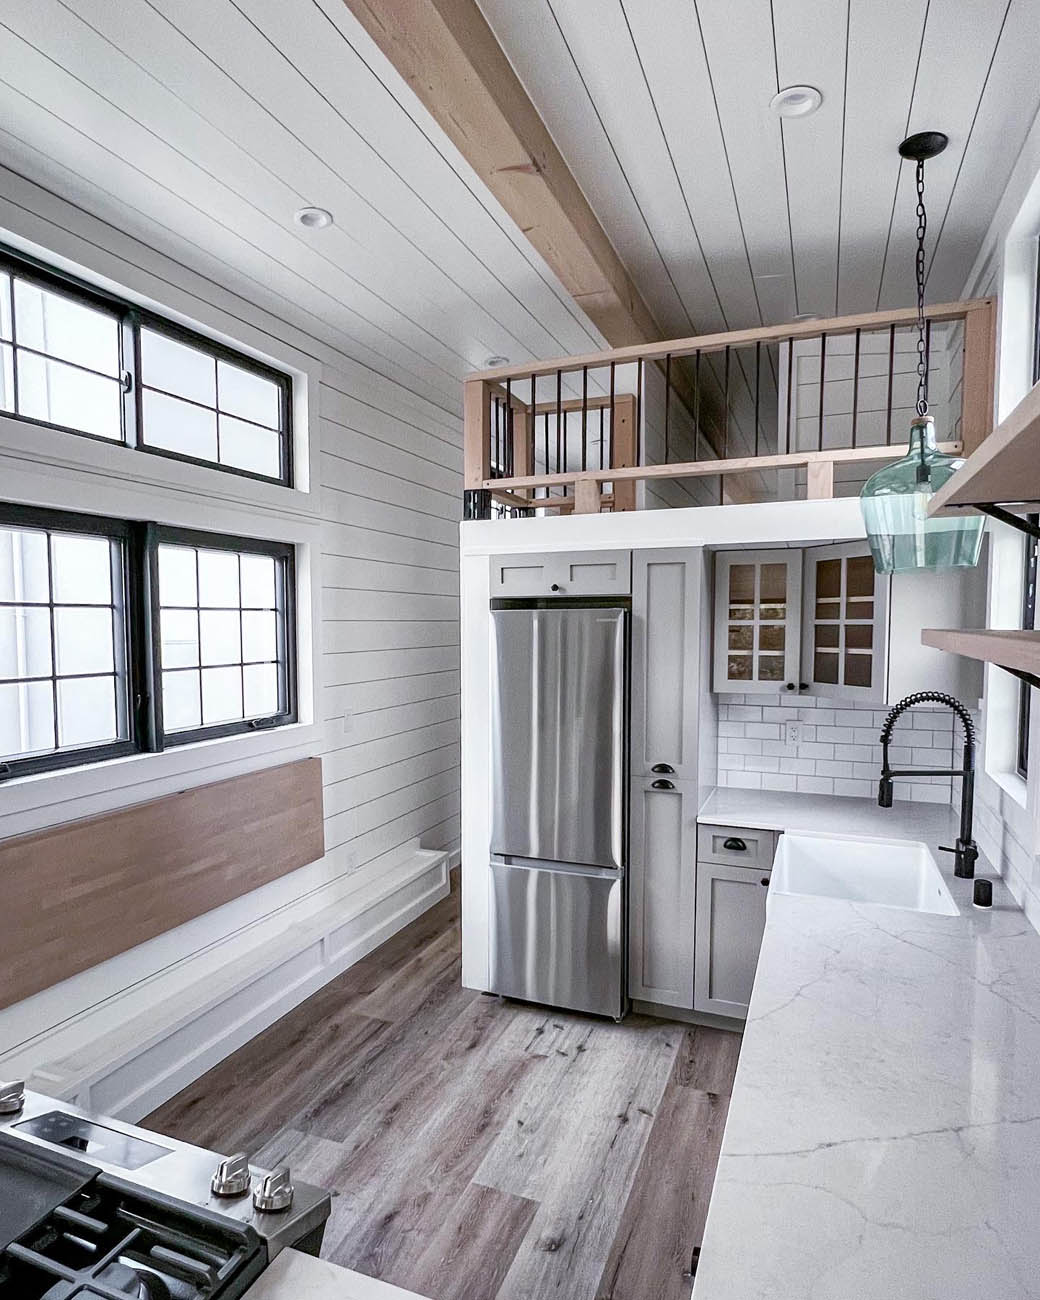 Inside a tiny ADU kitchen with a bedding loft, provided by Anchored Tiny Homes custom small home builder in Charlotte.